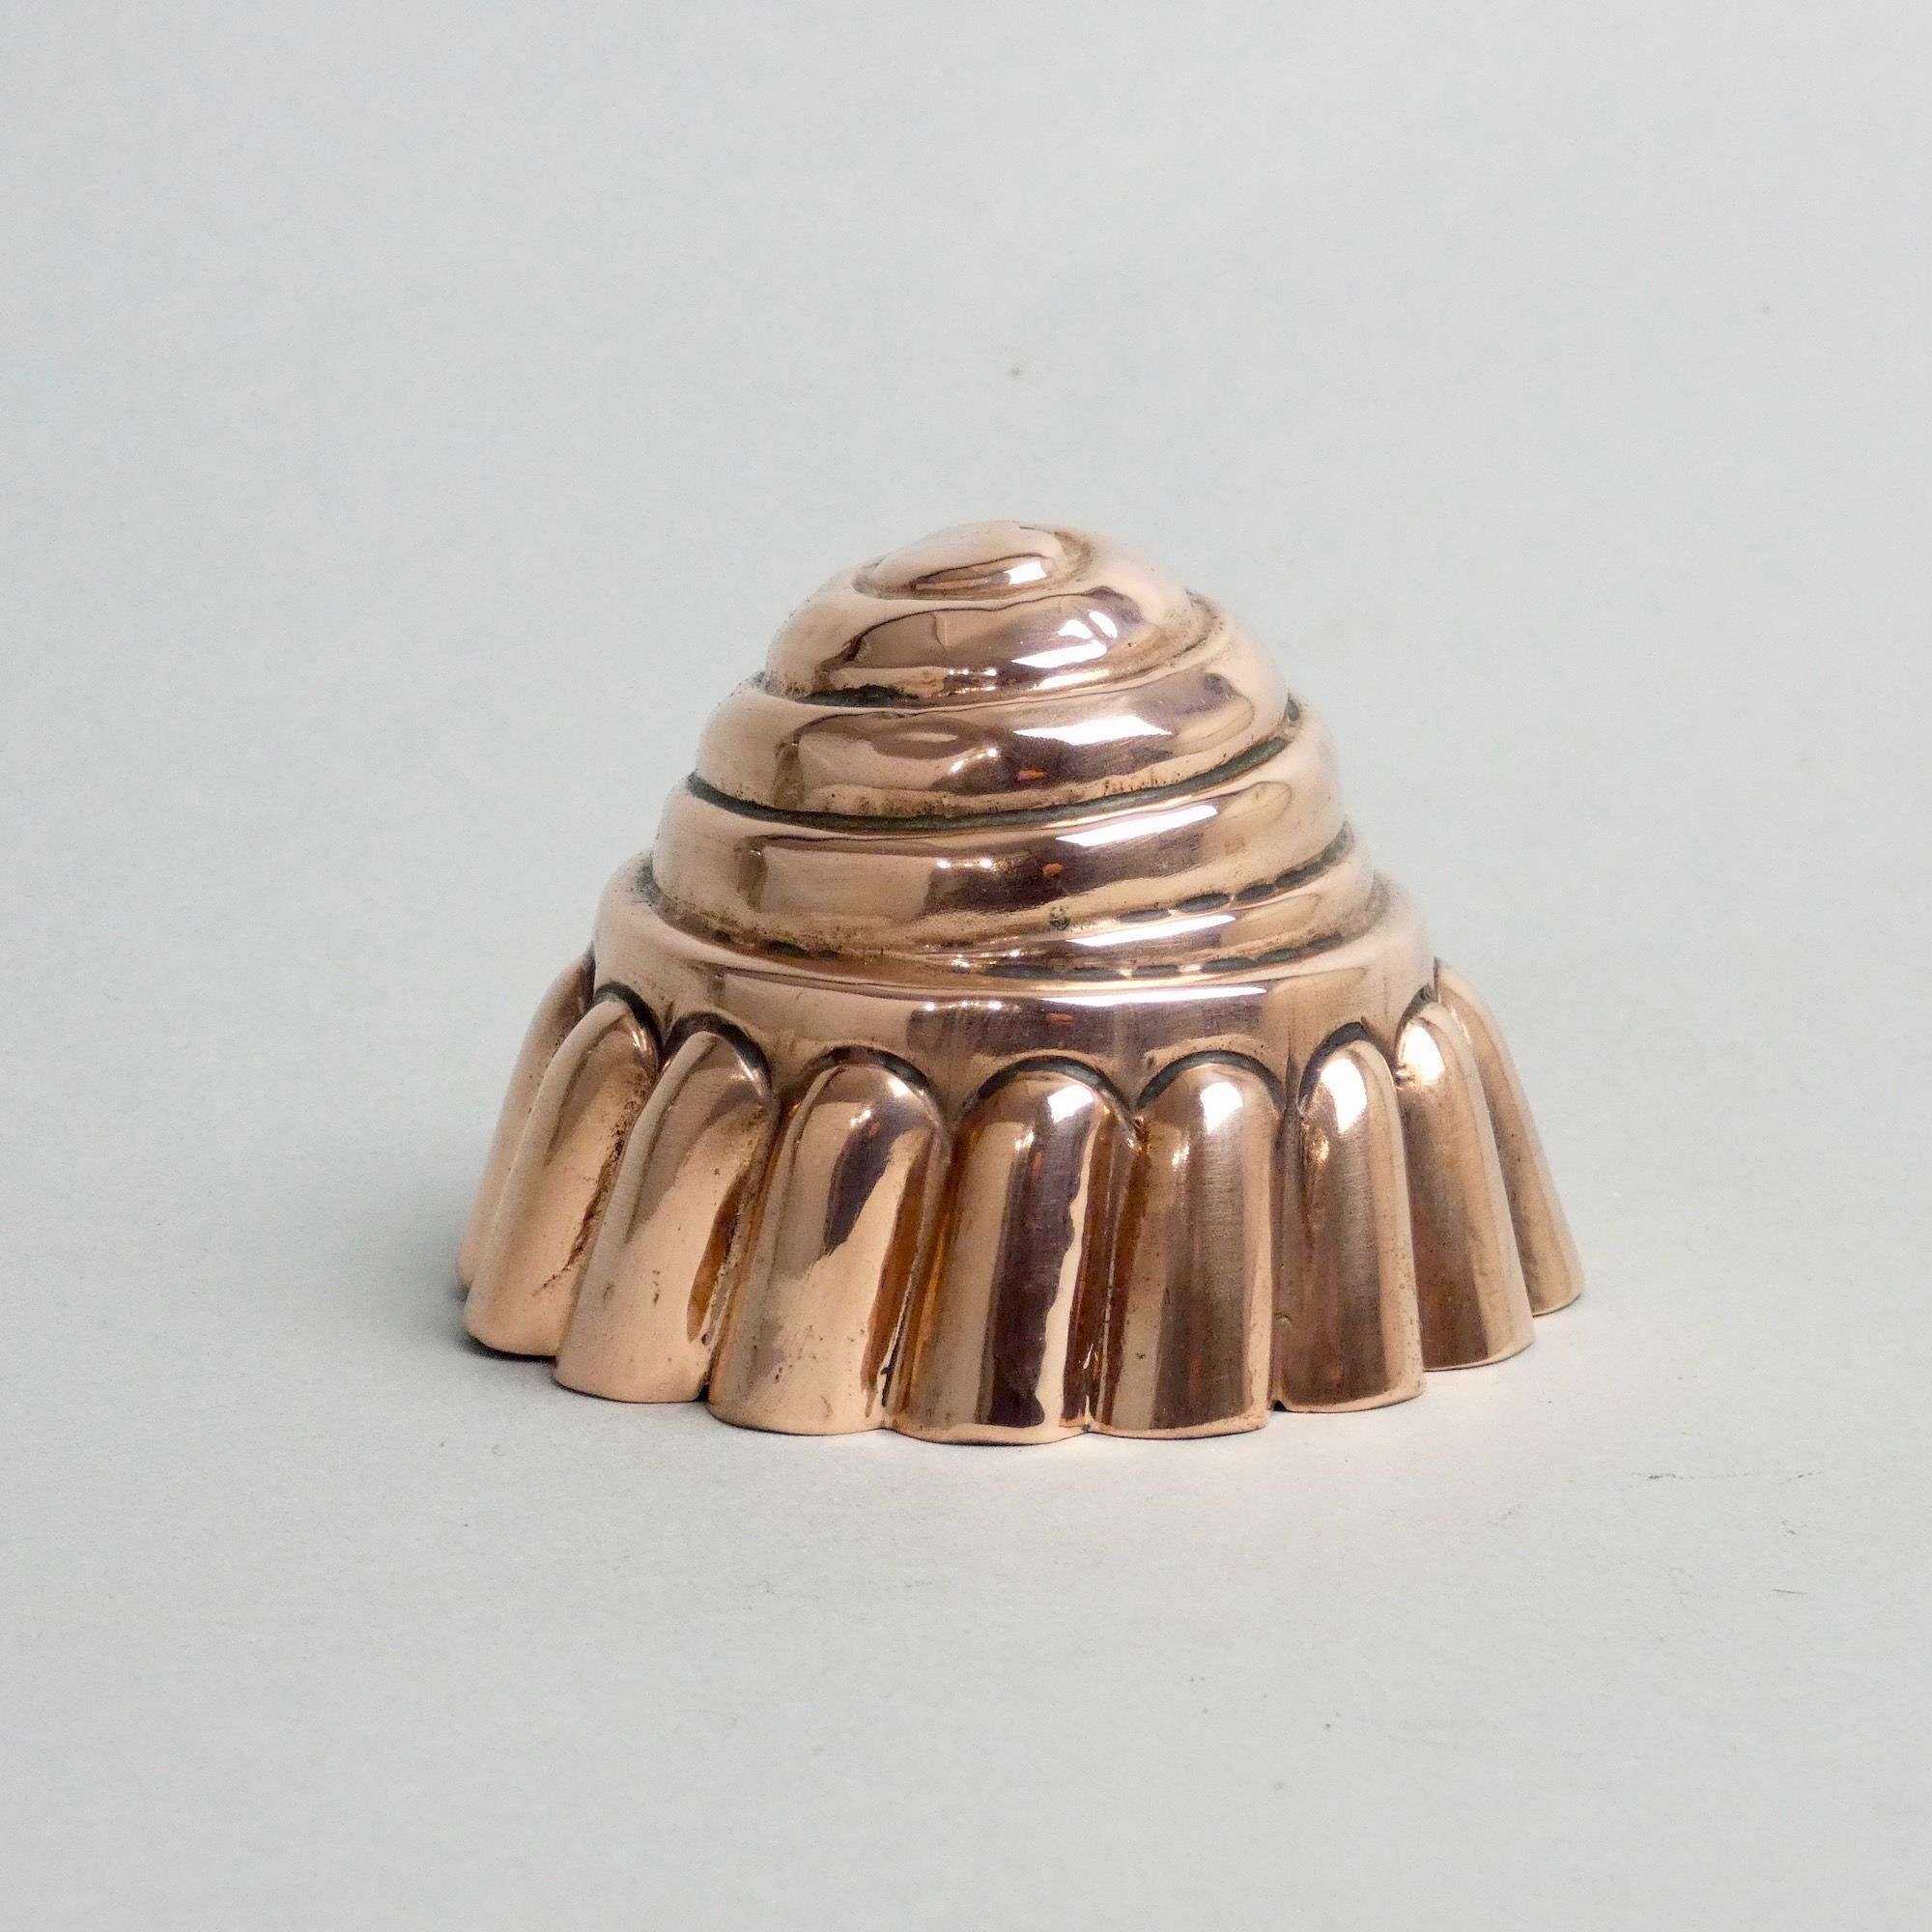 Small, spiral form copper mould.